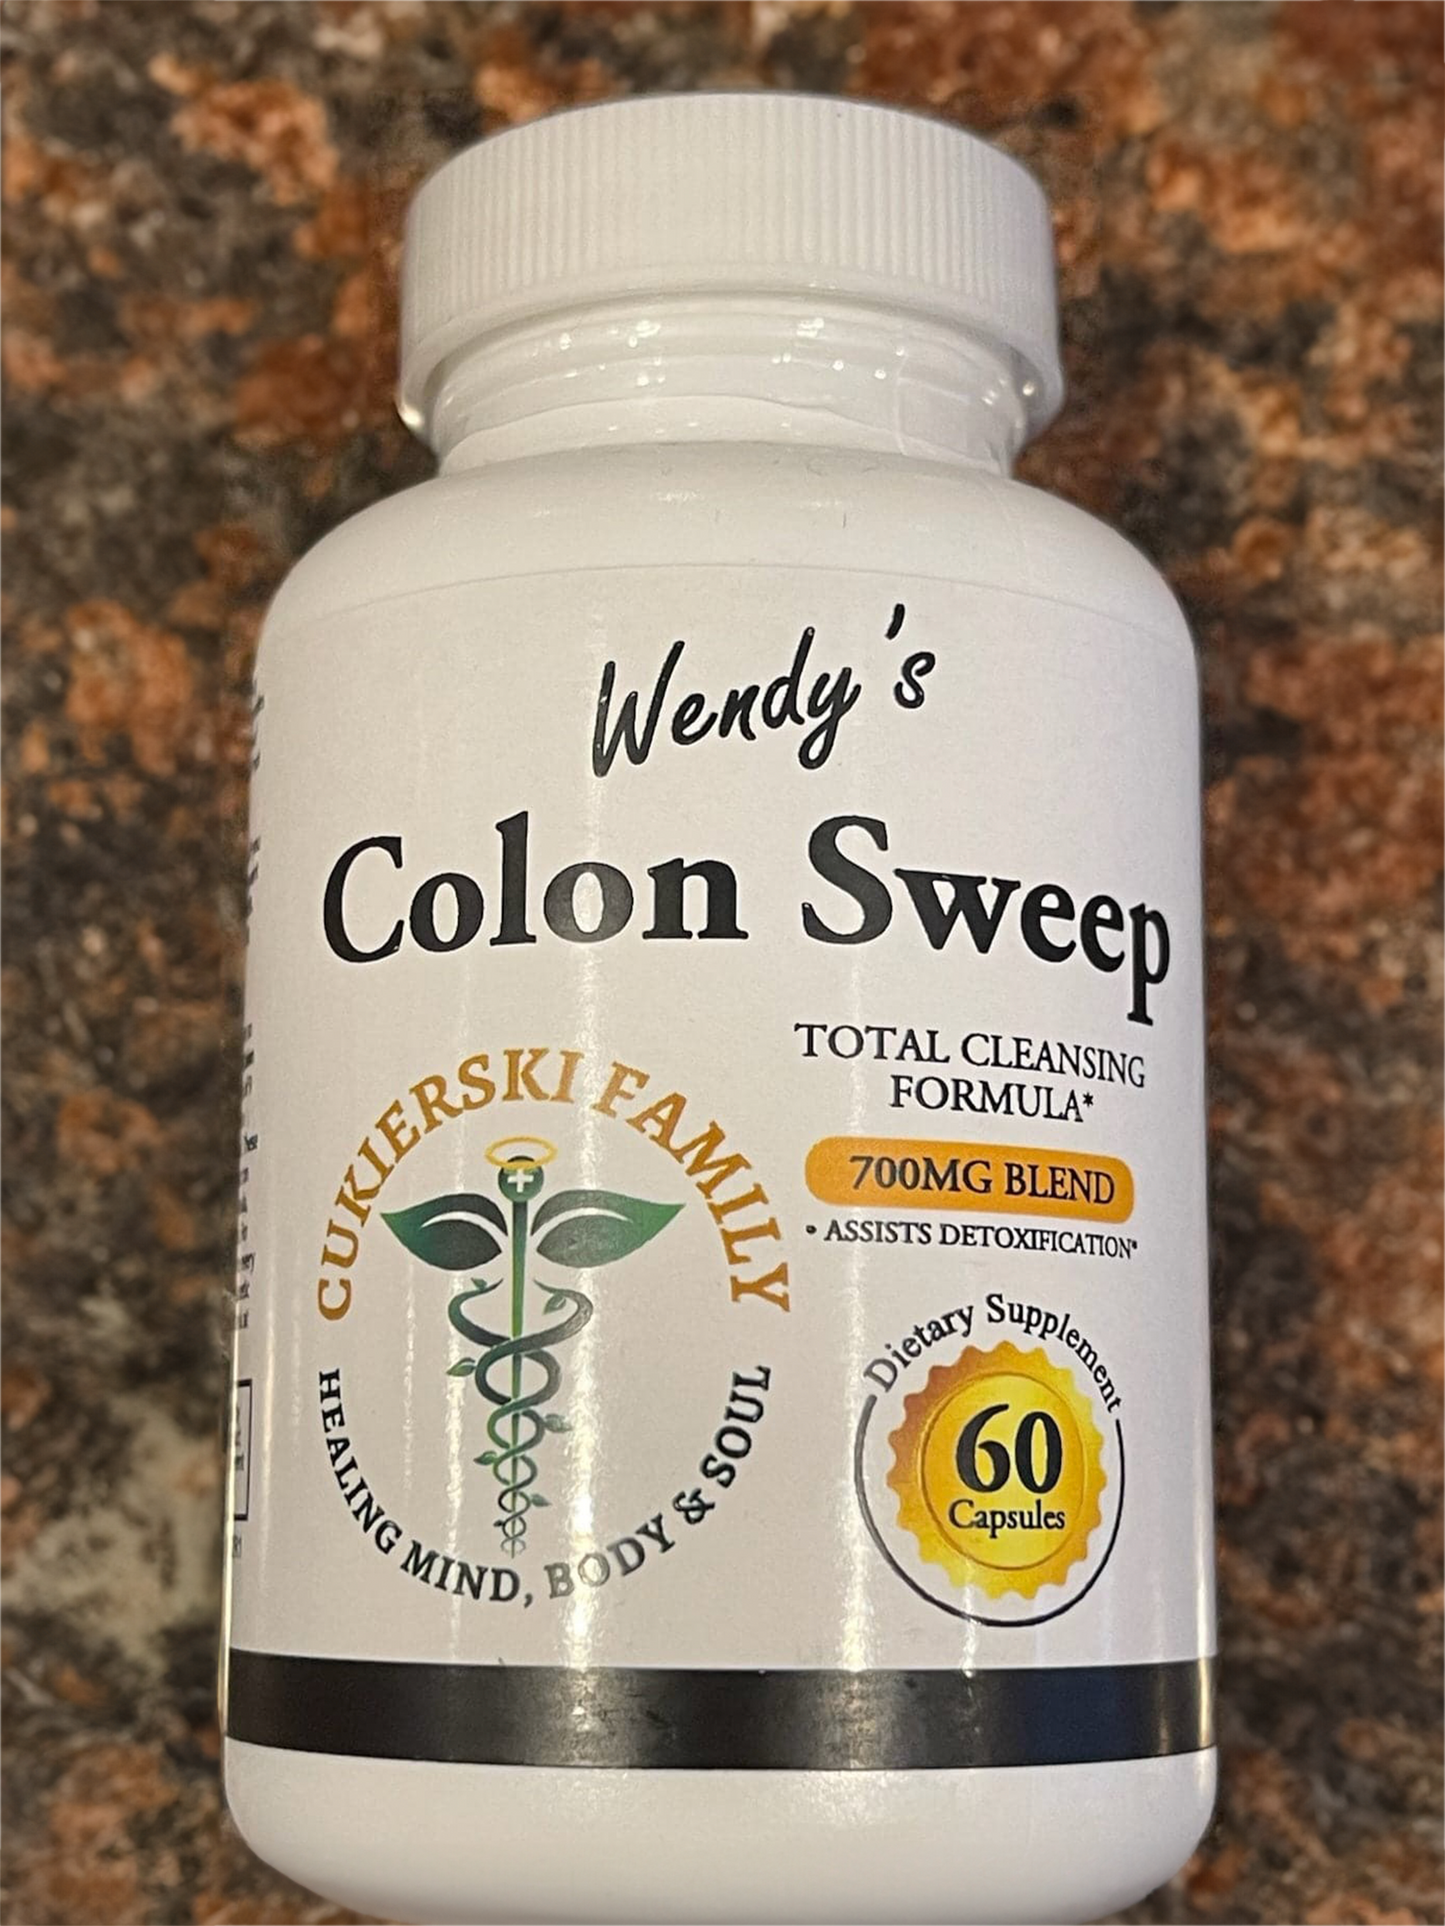 Colon Sweep Cleanse